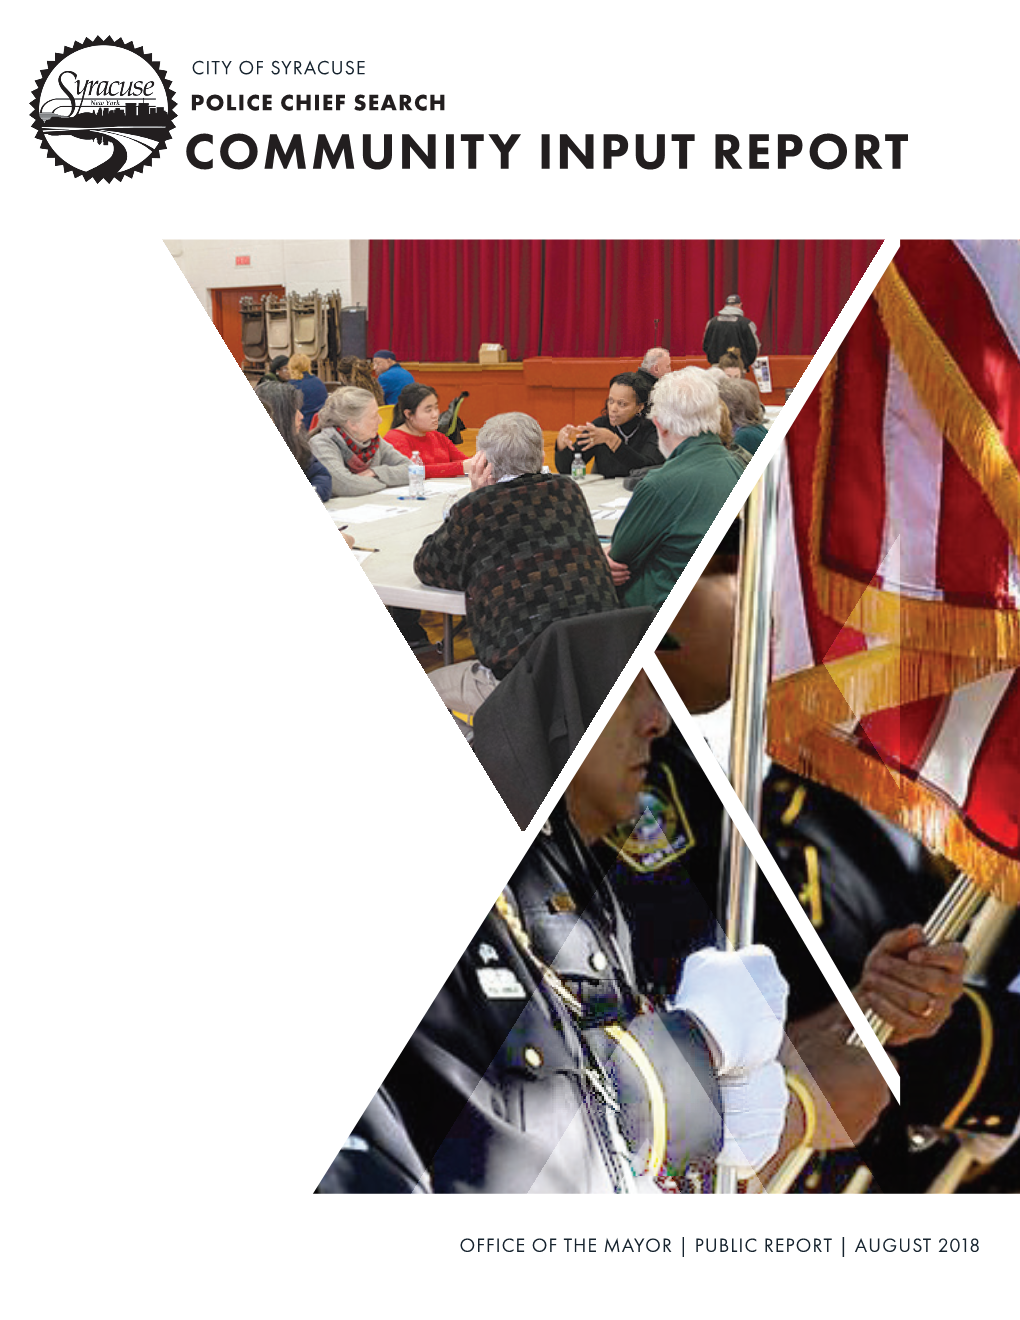 Syracuse Police Chief Search Community Input Report